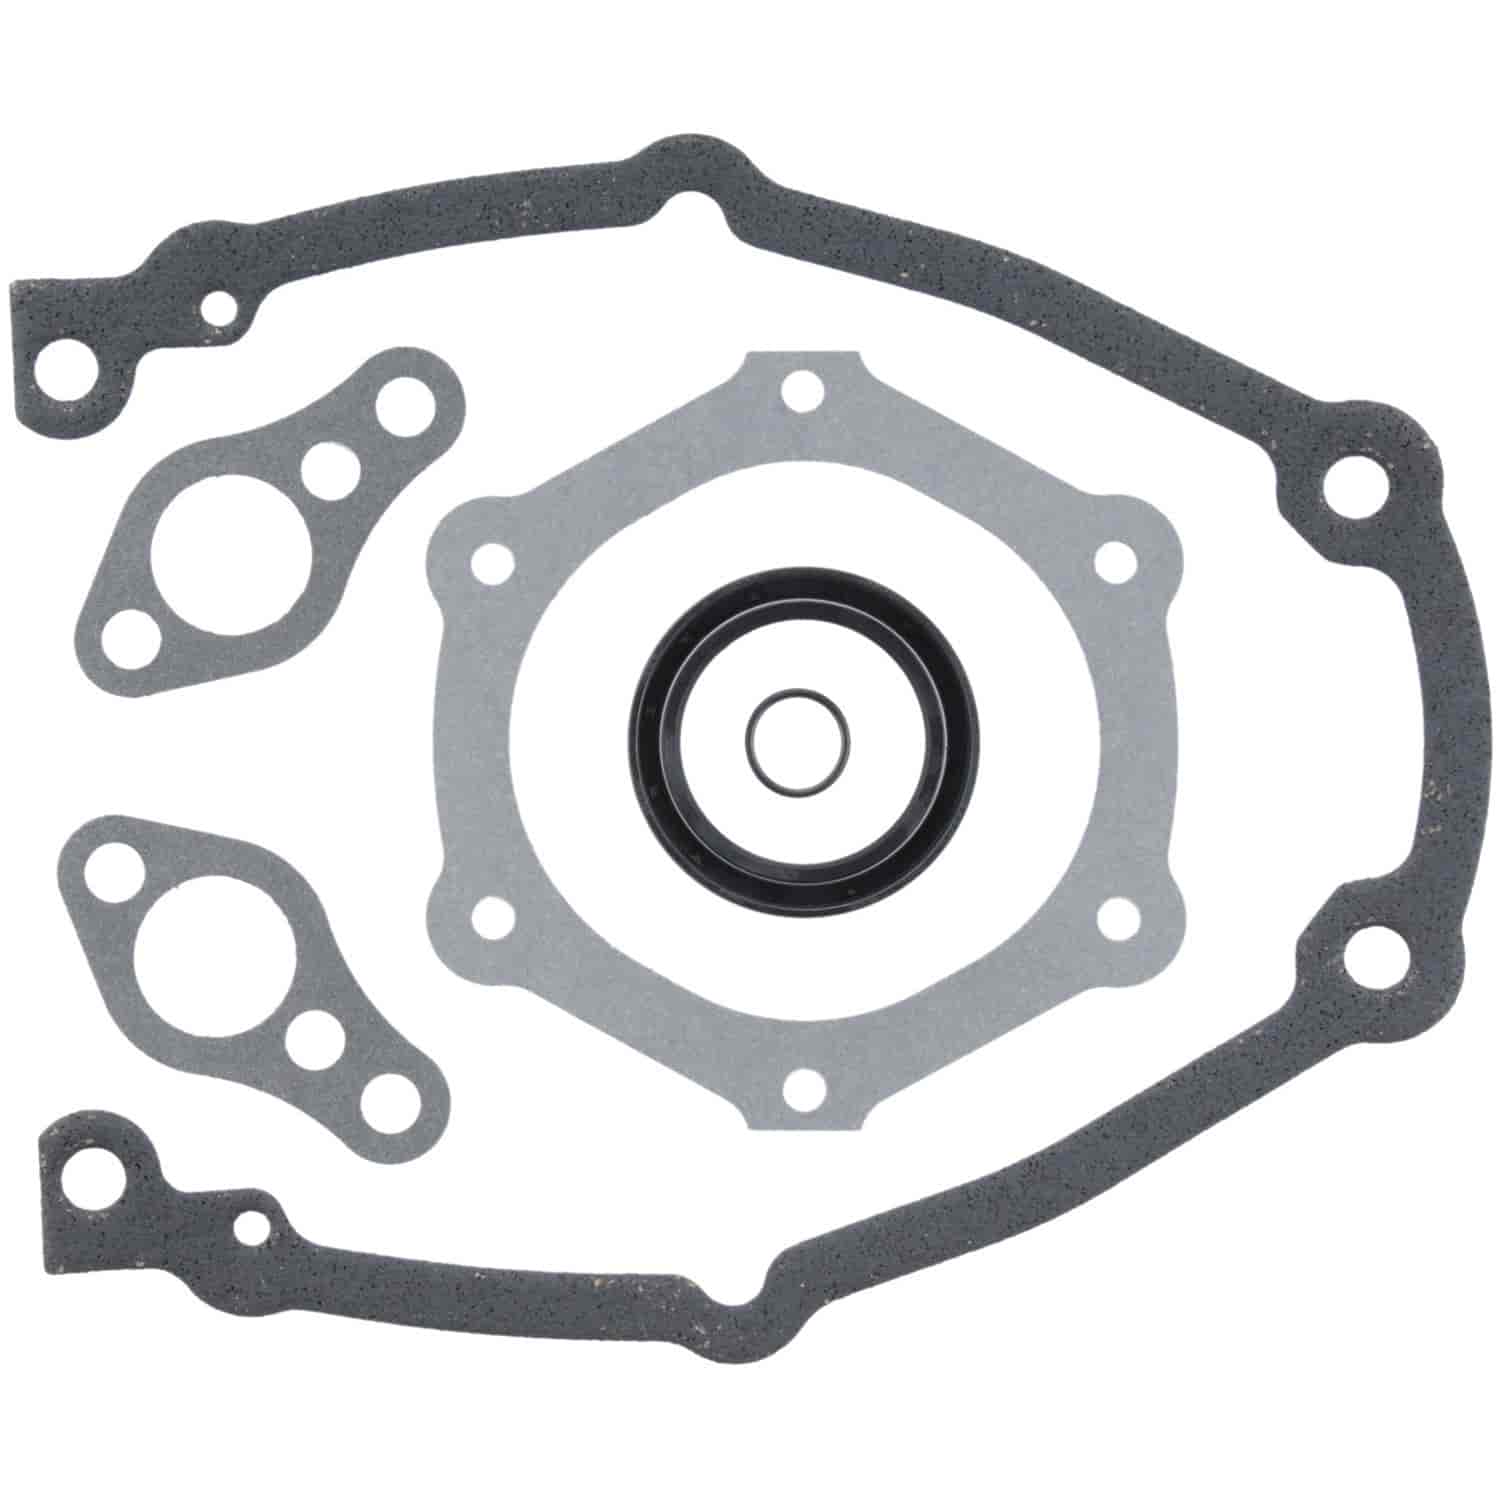 Clevite MAHLE Timing Cover Set Chev 4.3L 96-07